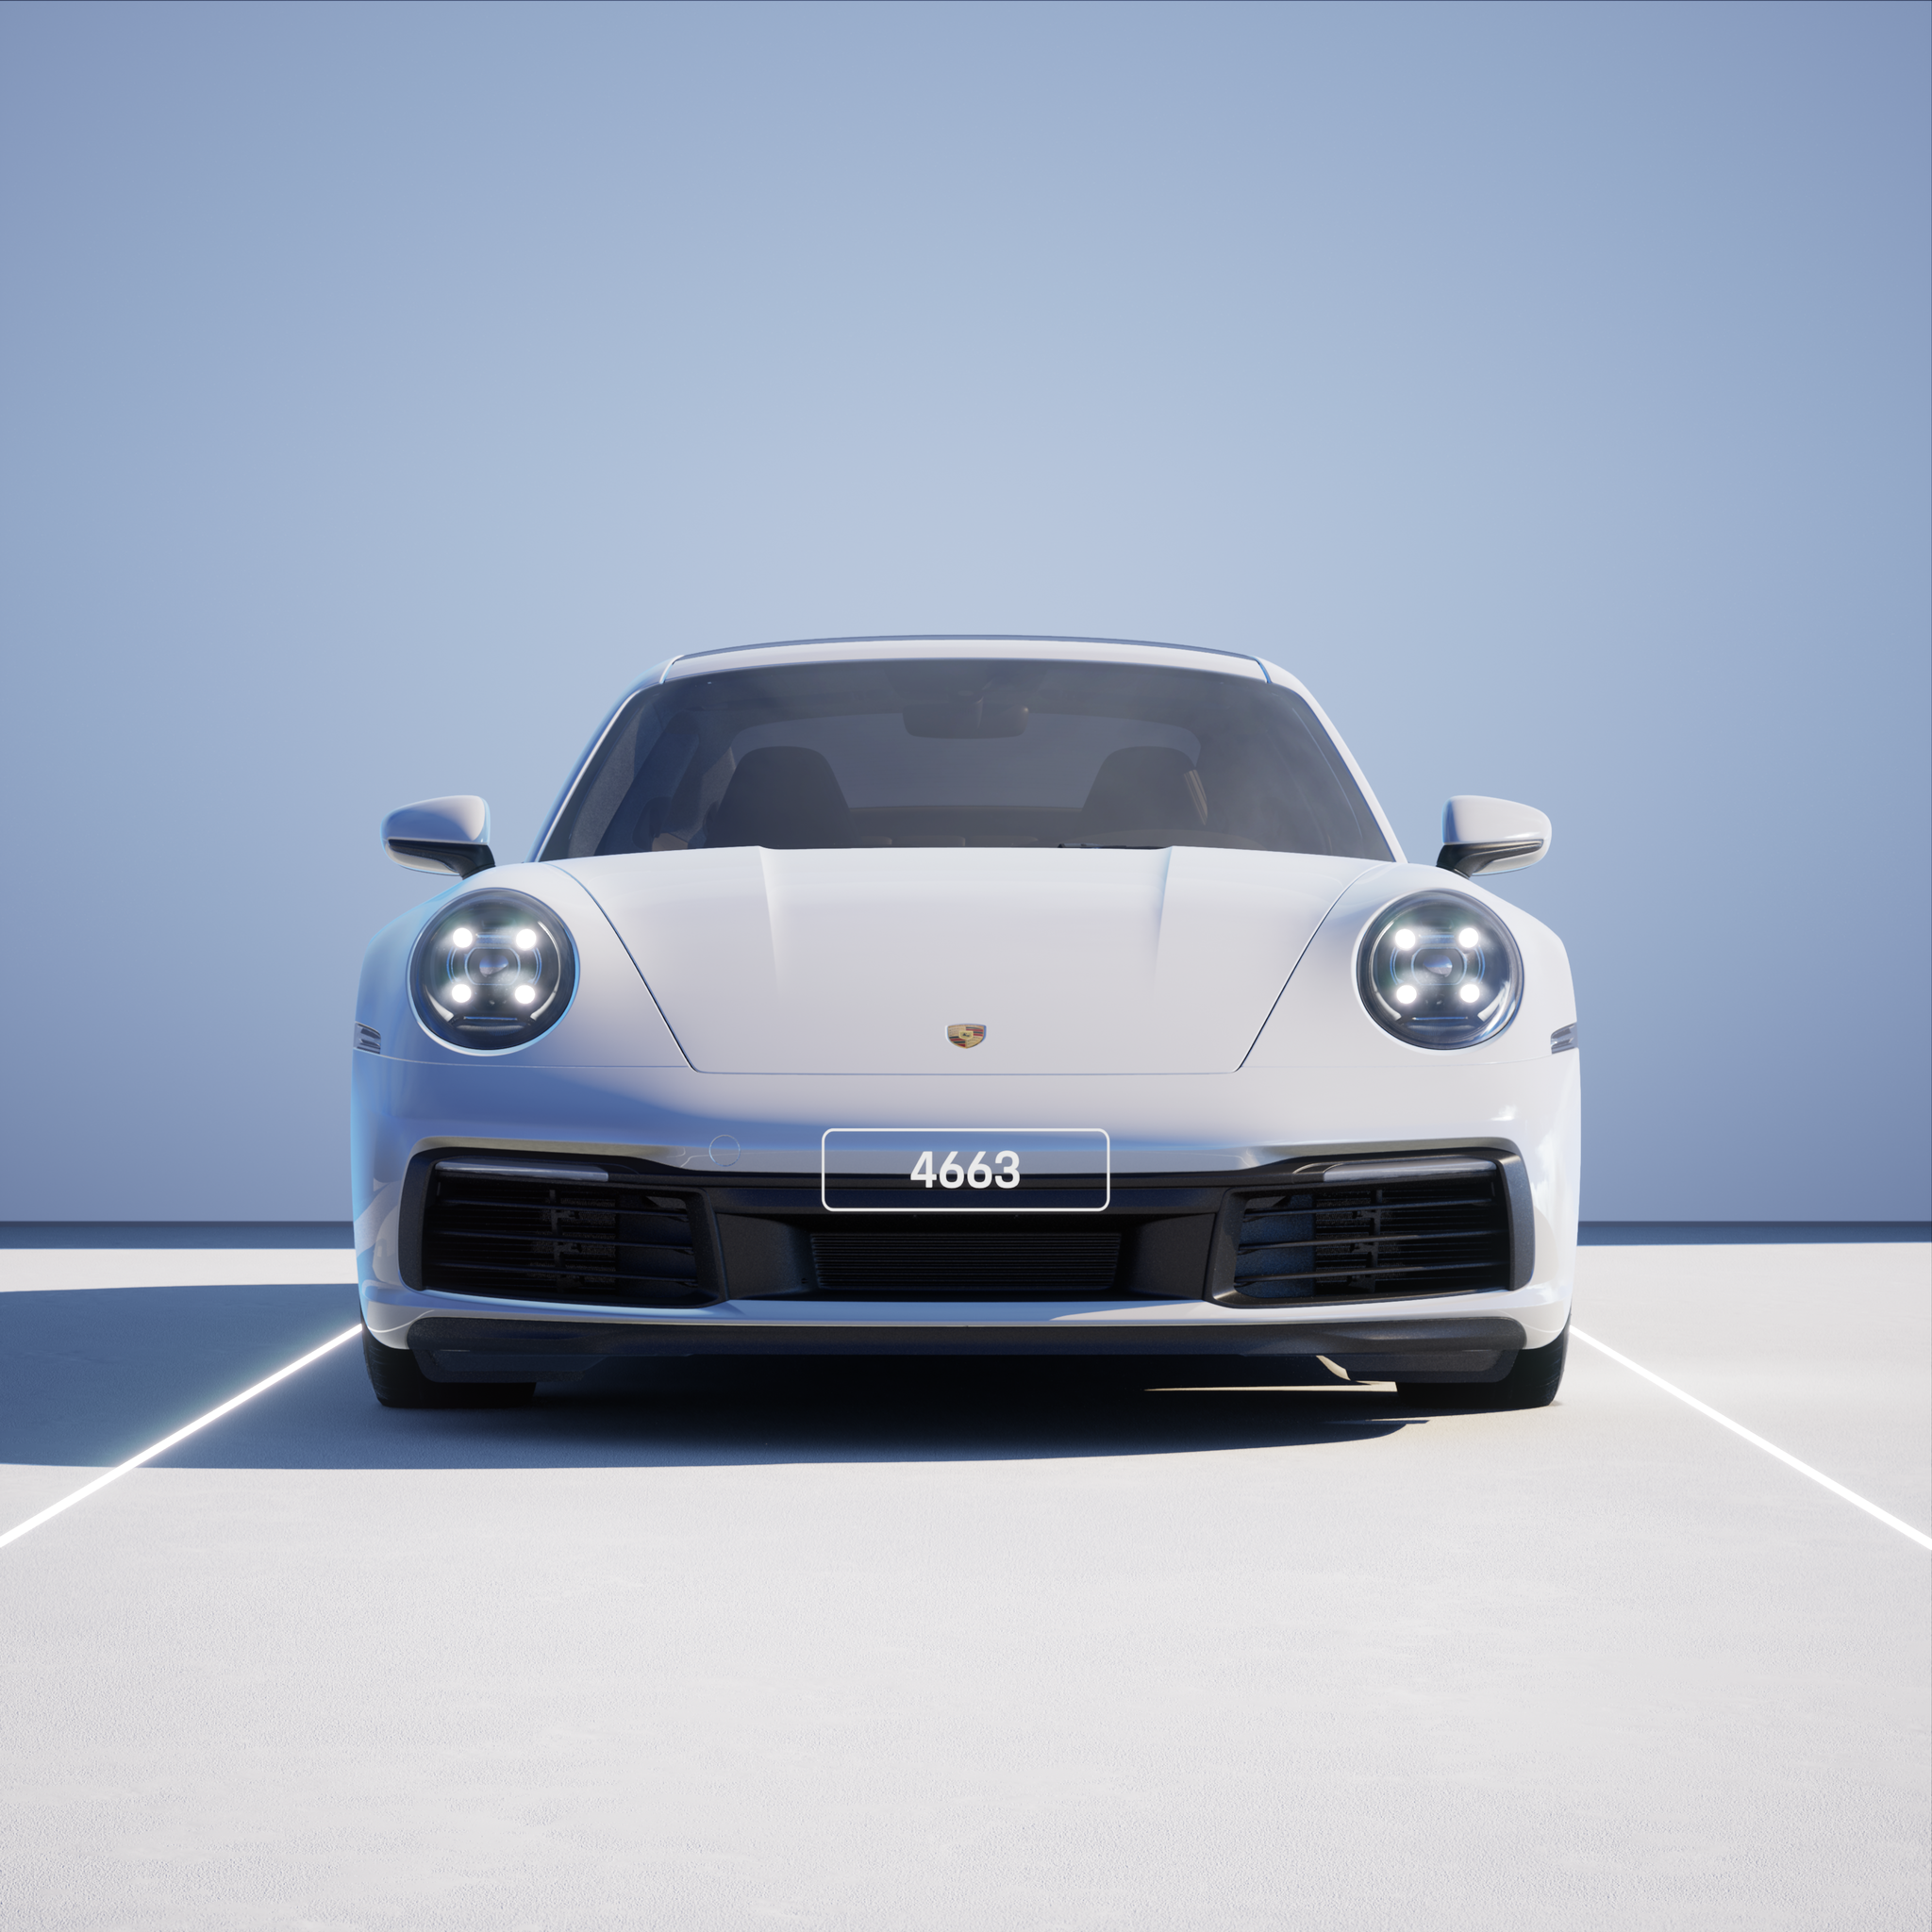 The PORSCHΞ 911 4663 image in phase